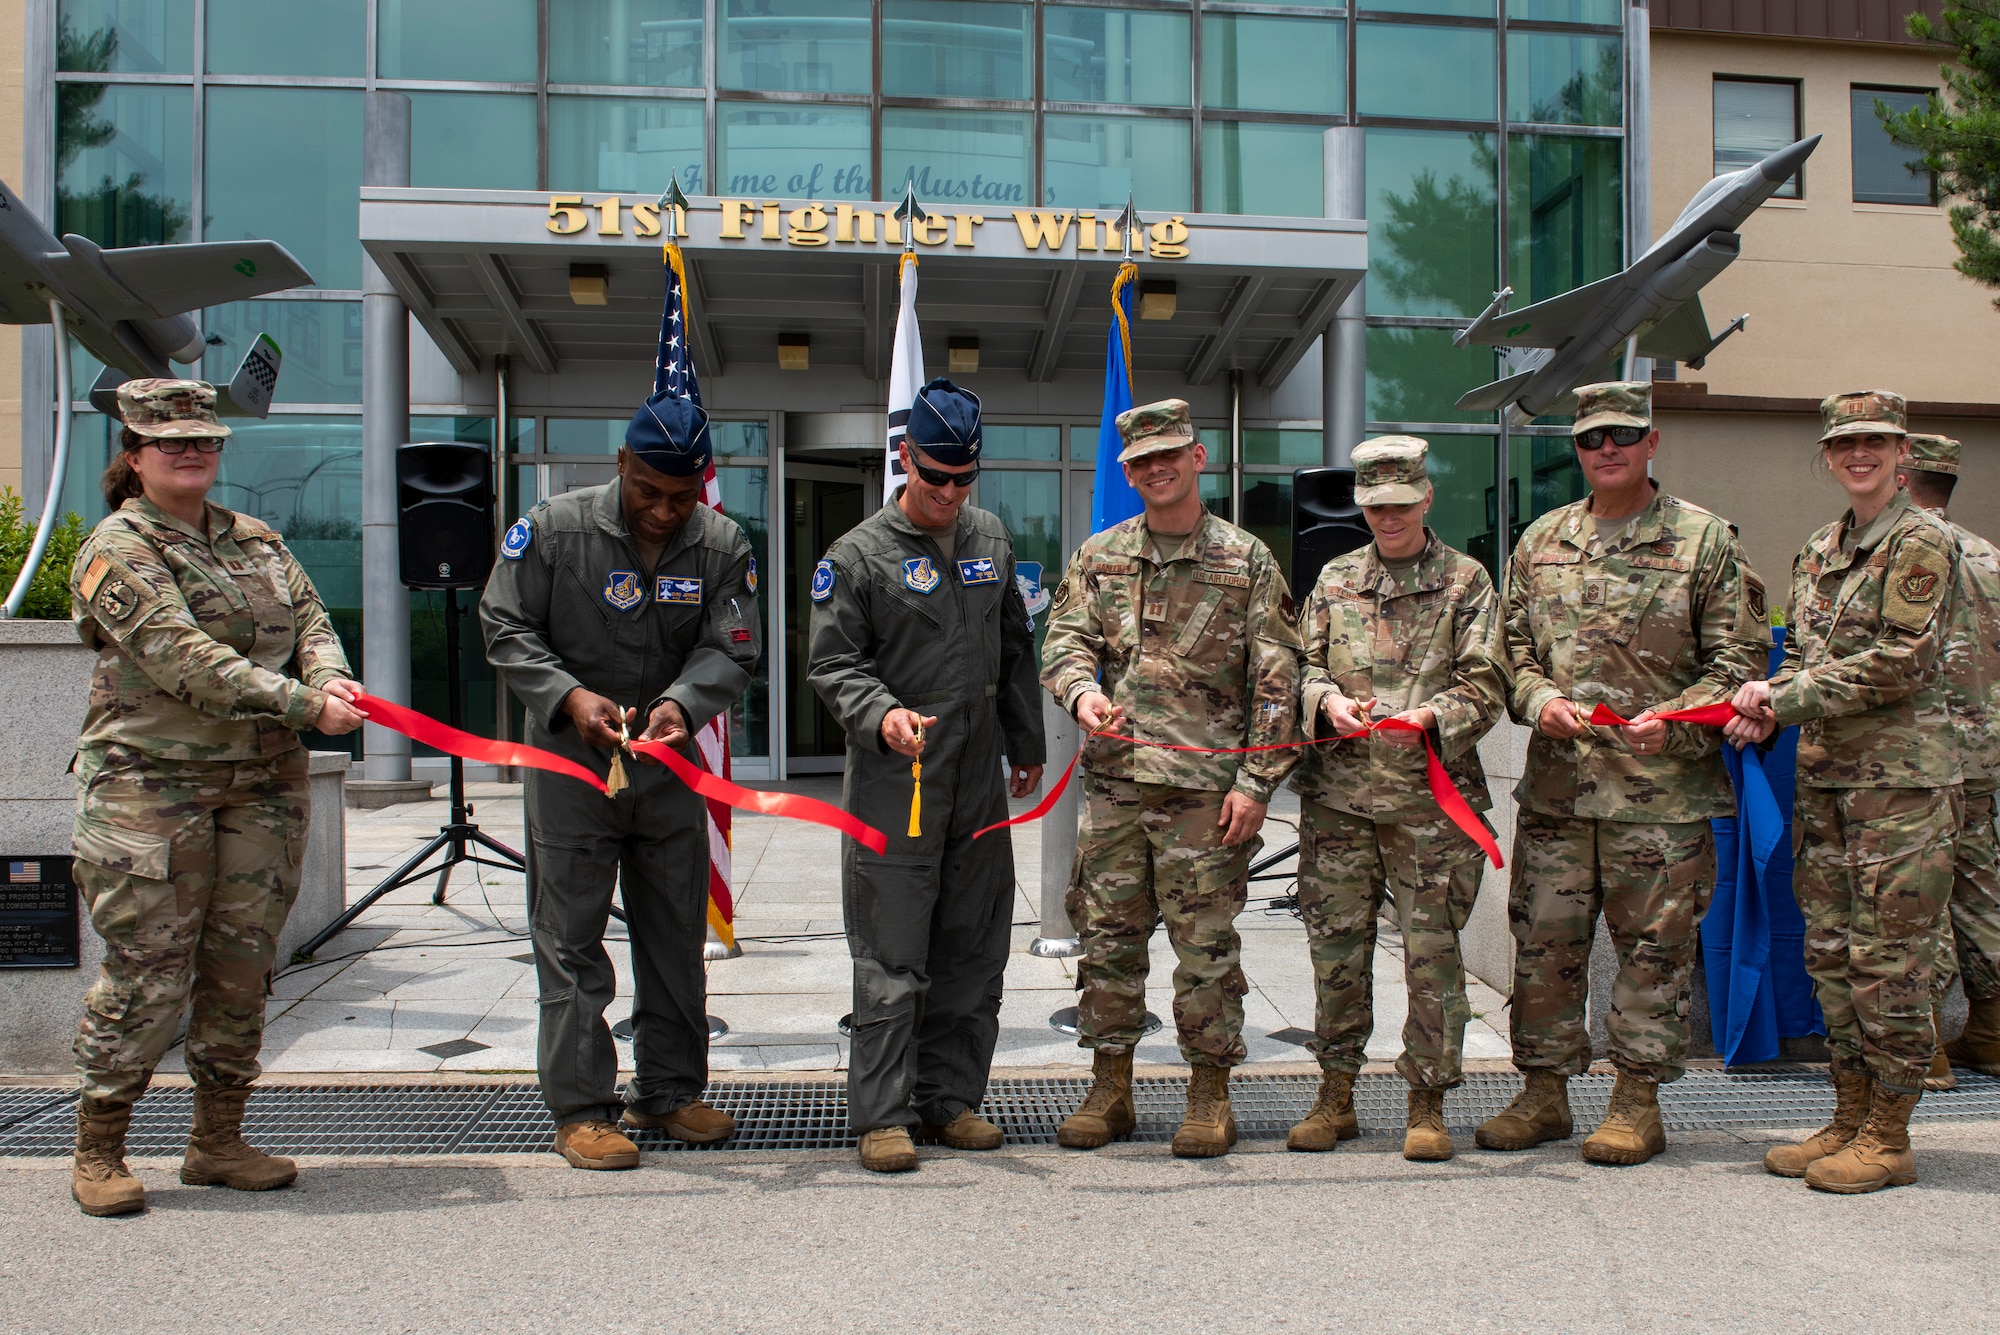 The 51st Fighter Wing held a renaming and ribbon cutting ceremony for its headquarters building at Osan Air Base, Republic of Korea, July 1, 2021. The building, which serves as the 51st Fighter Wing headquarters, was dedicated to Brig. Gen. Benjamin O. Davis Jr. in recognition of his 34 years of service that spanned across World War II, Vietnam, Korea and the Cold War.